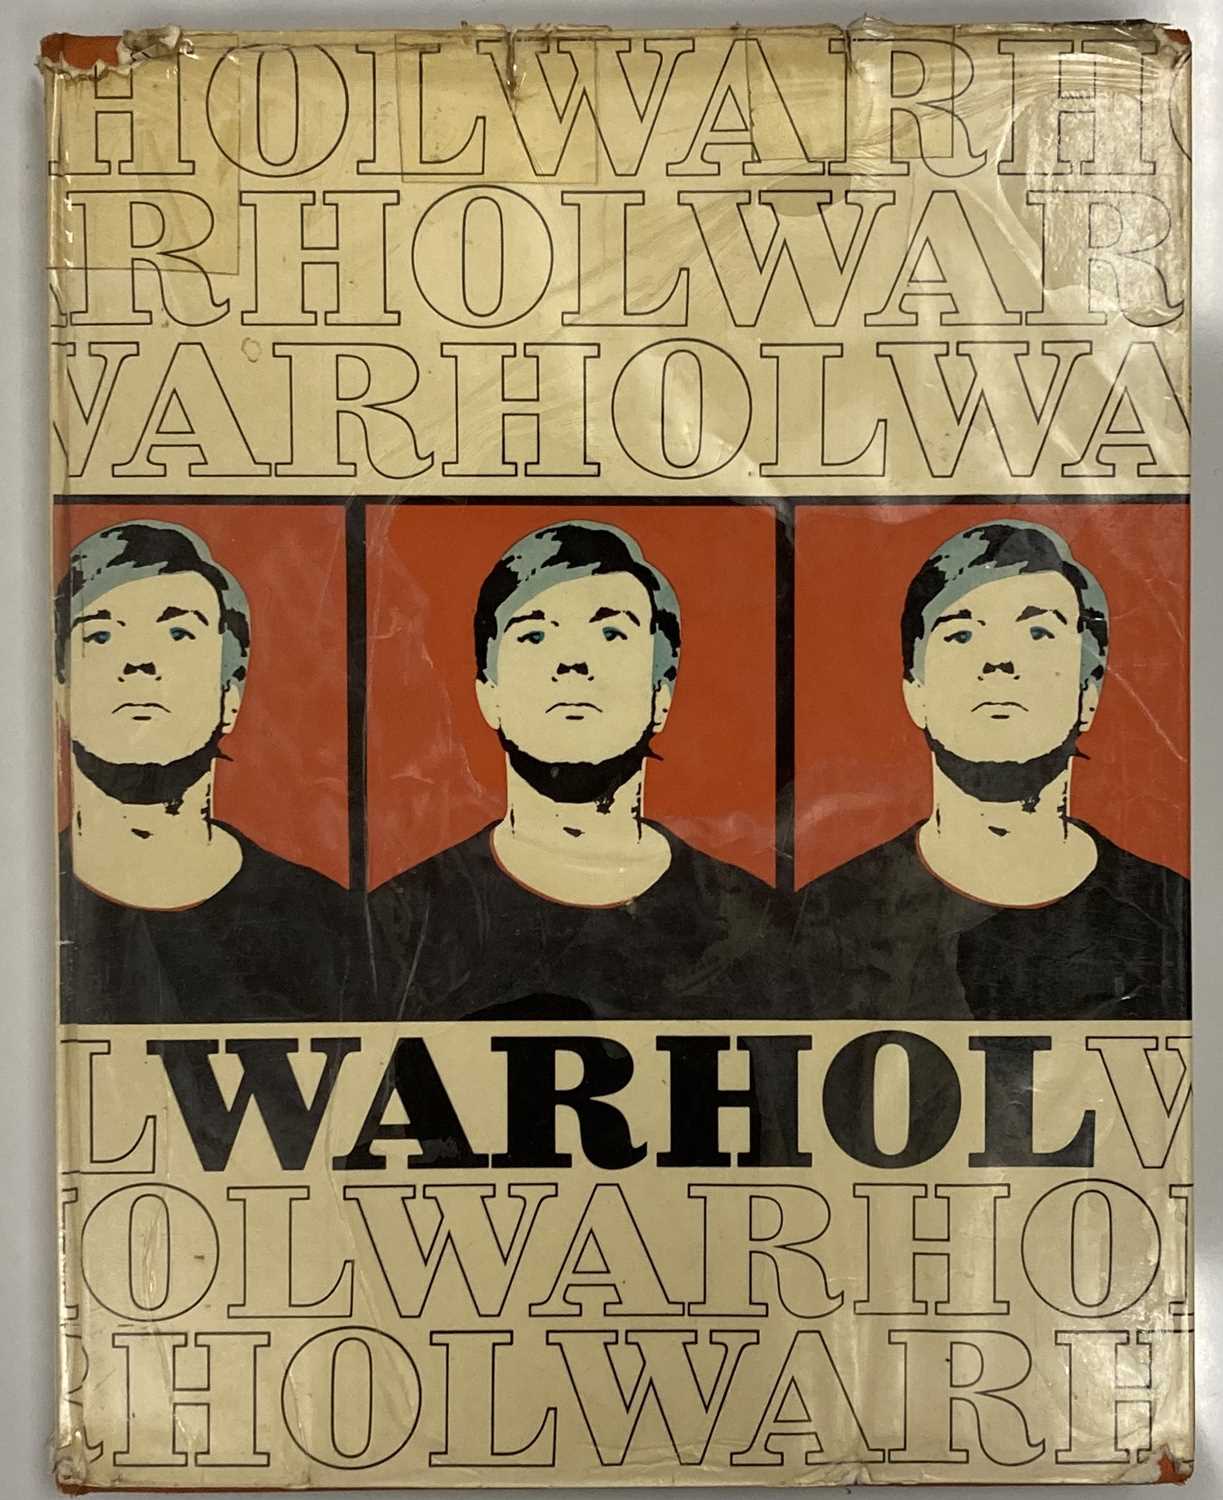 ANDY WARHOL - CATALOGUE RAISONNE AND SOTHEBY'S CATALOGUES - Image 2 of 9